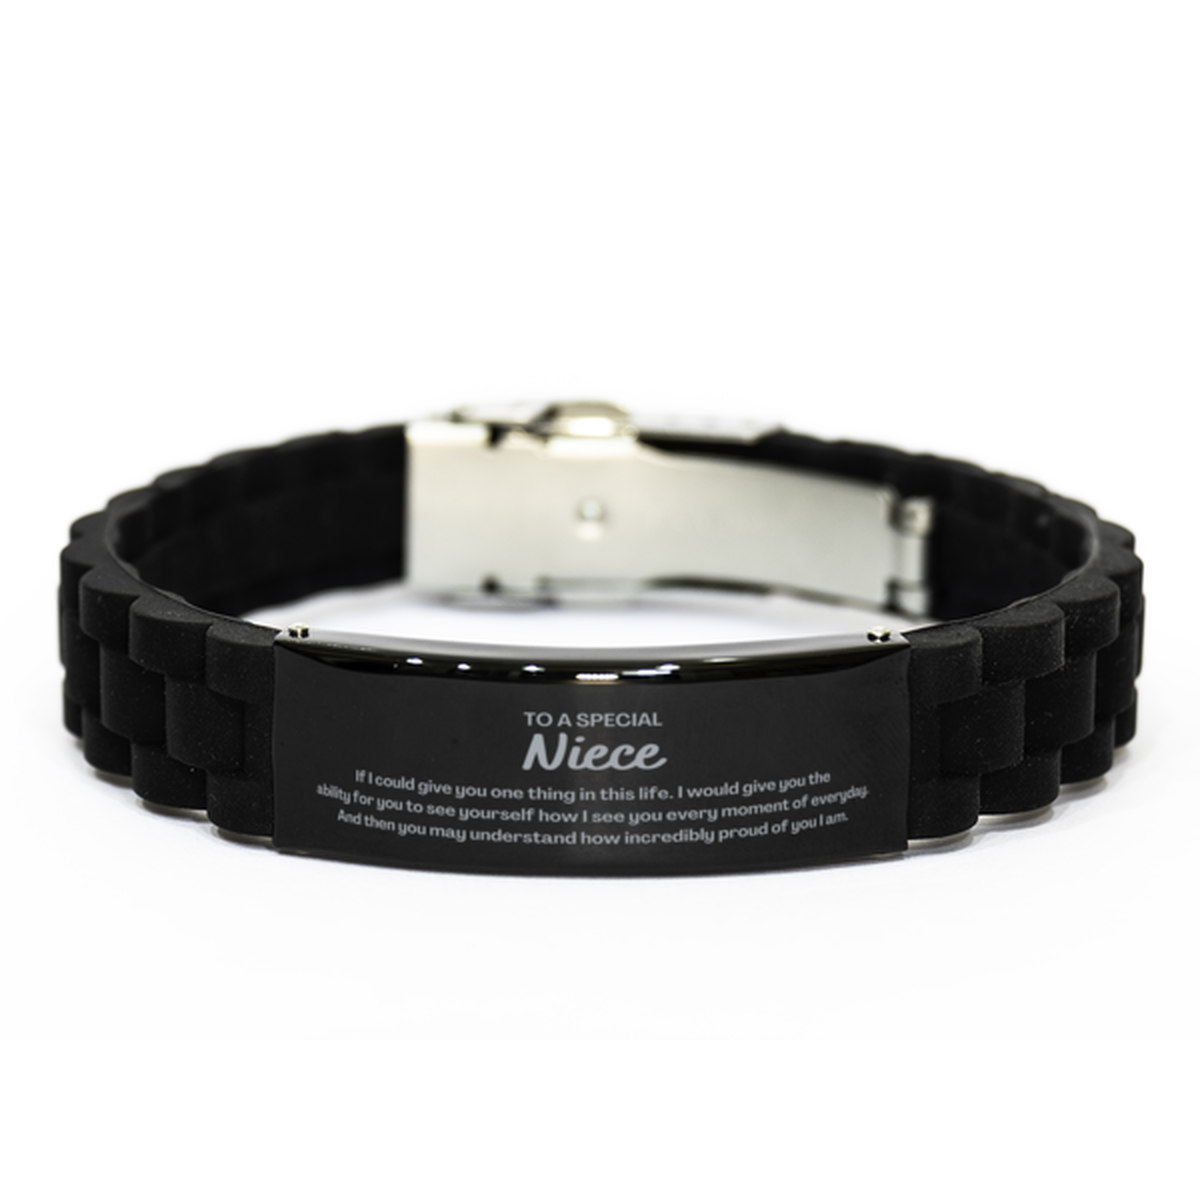 To My Niece Black Glidelock Clasp Bracelet, Gifts For Niece Engraved, Inspirational Gifts for Christmas Birthday, Epic Gifts for Niece To A Special Niece how incredibly proud of you I am